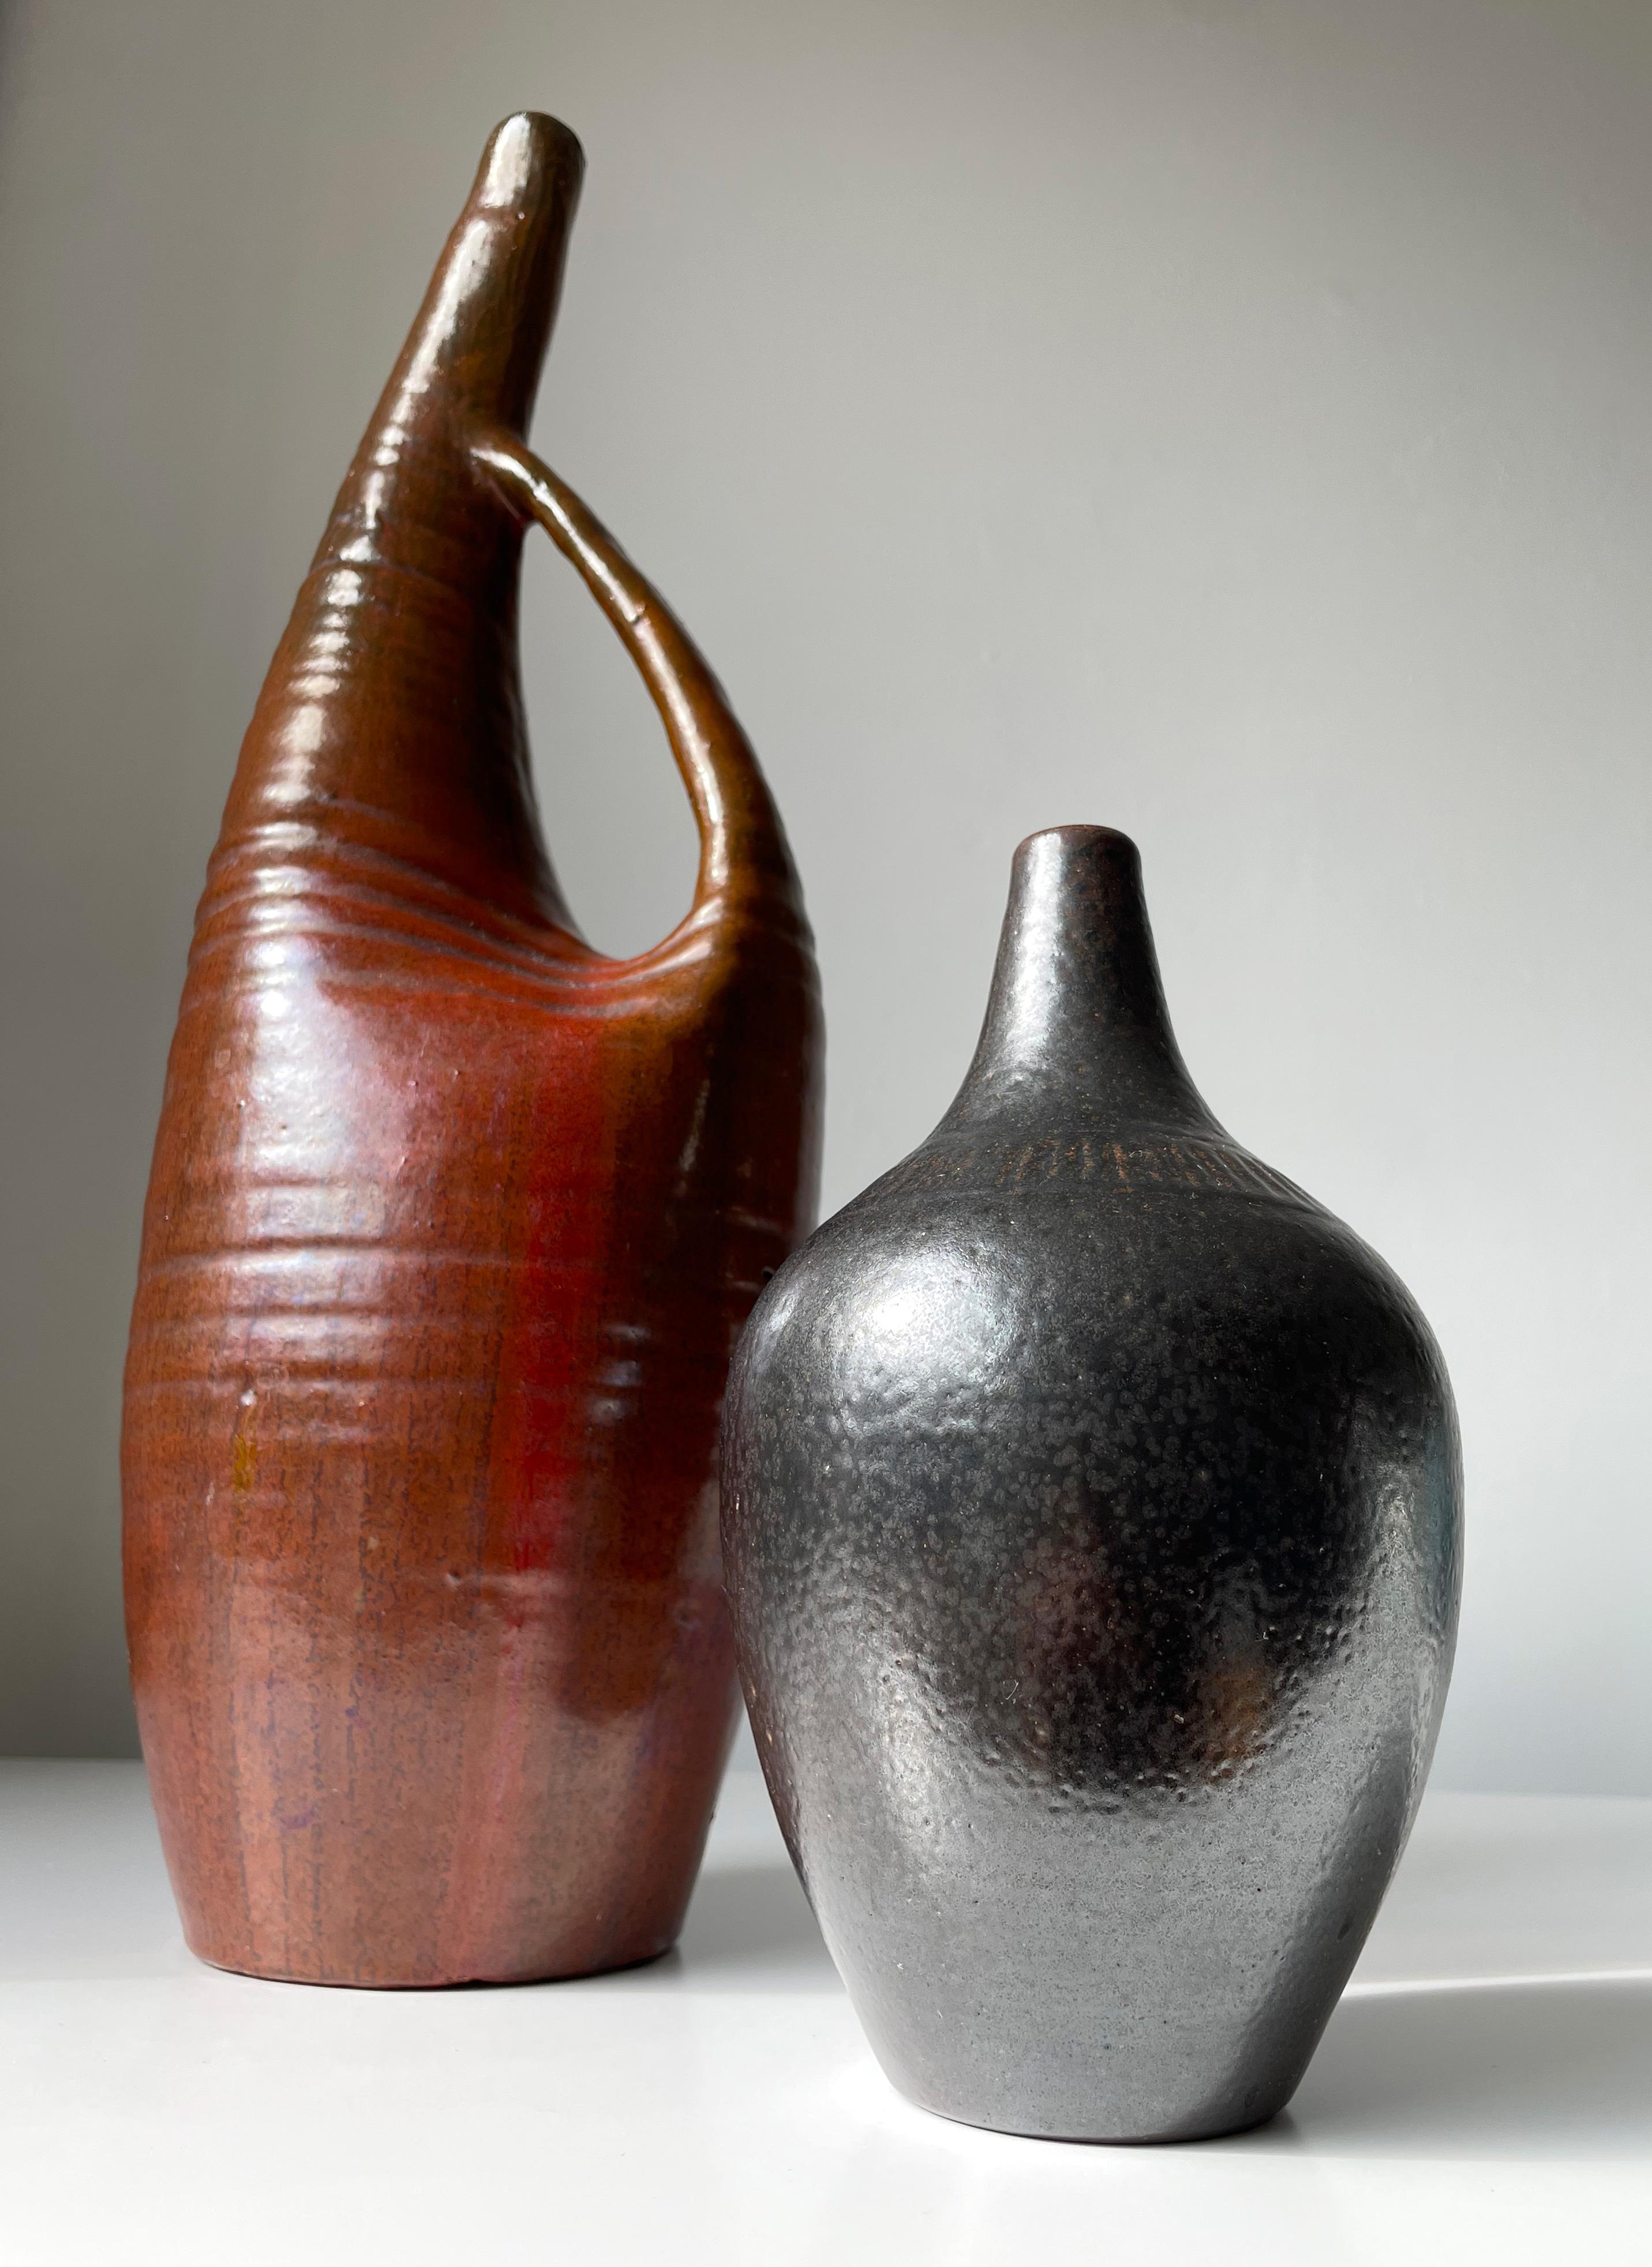 Muted blackish dark brown glazed stoneware vase with precise and narrow vertically incised lined pattern band around the top of the belly. Soft rounded bottle shape with slender neck and narrow base. Inscribed under base. Designed by ceramic artist